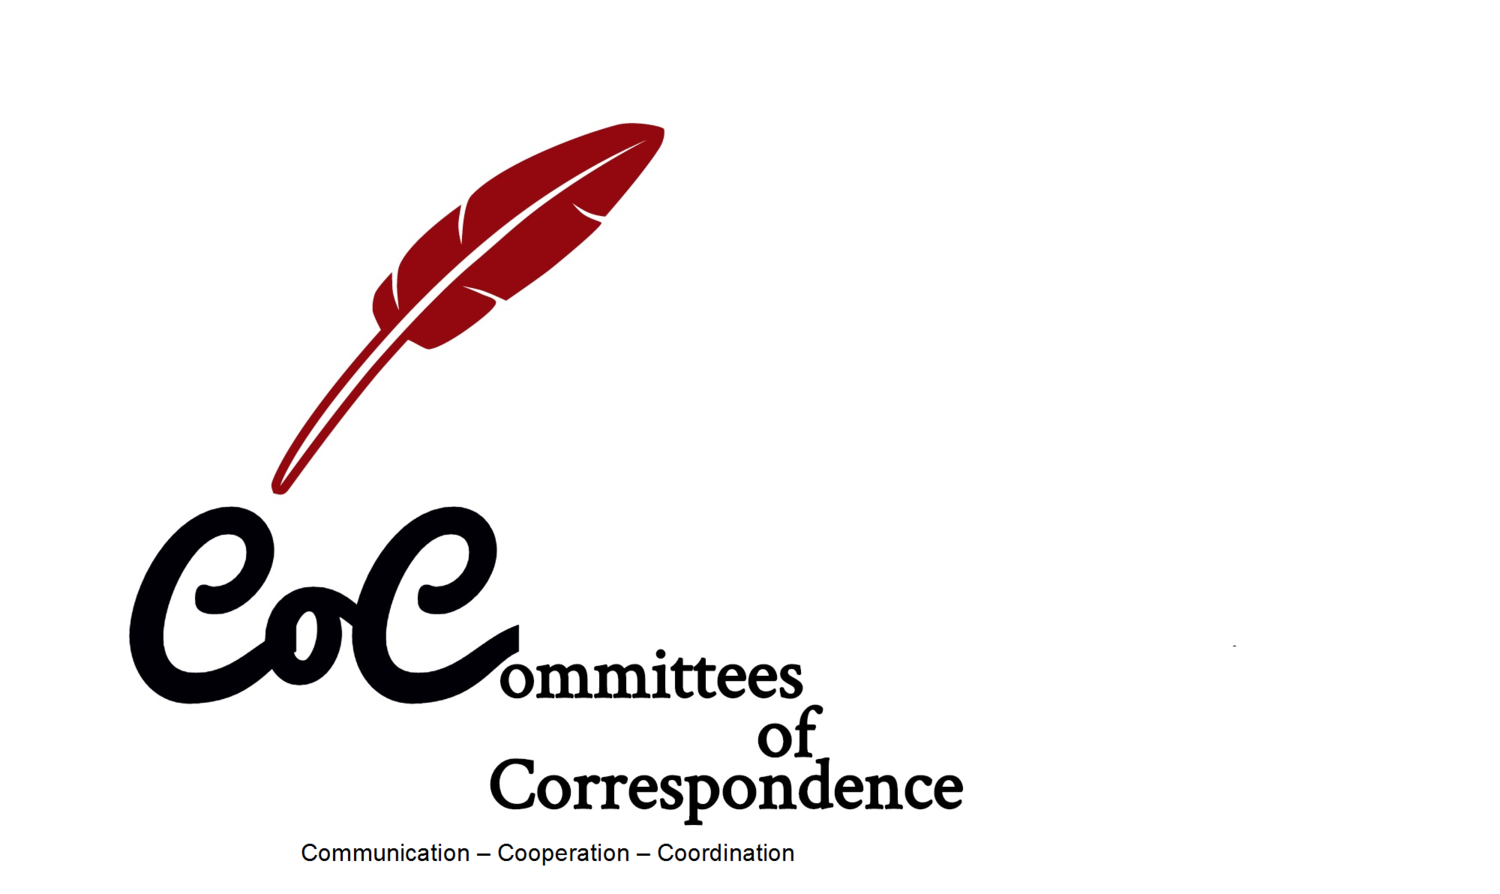 The Committees of Correspondence